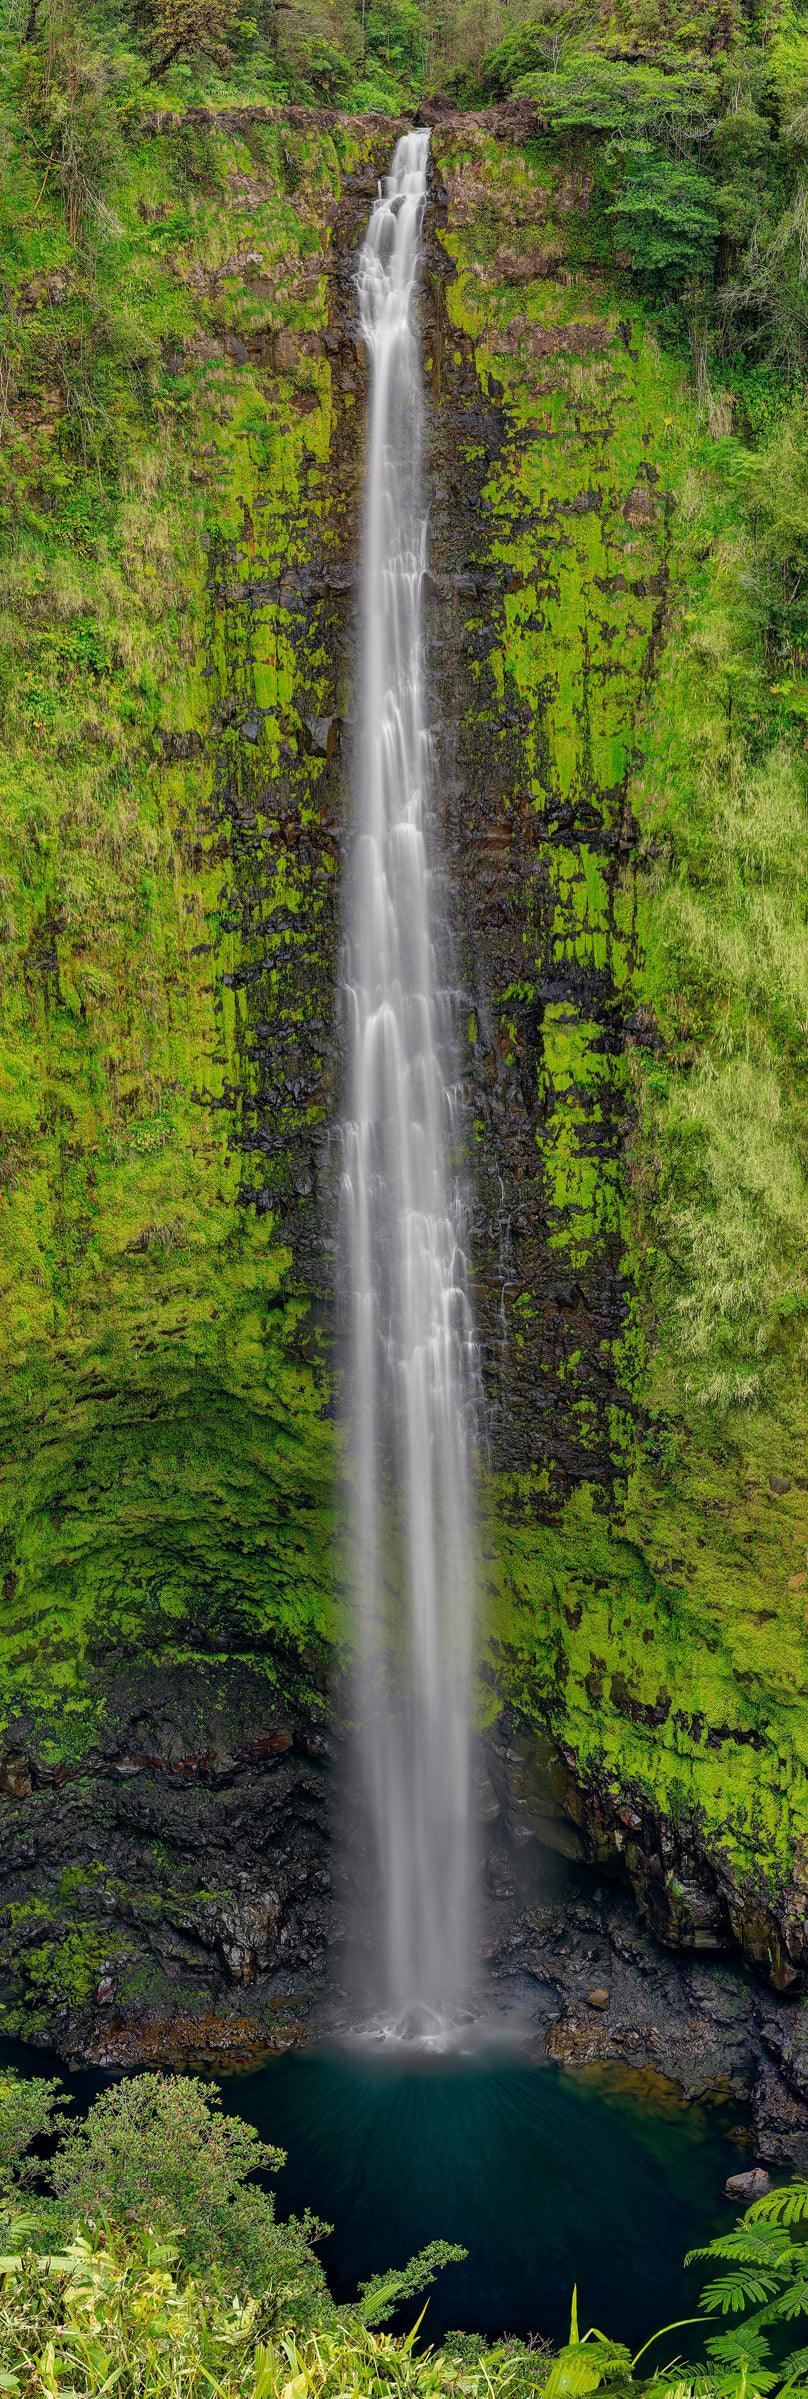 Waterfall pouring down a tall moss covered black rock cliff into a water hole below